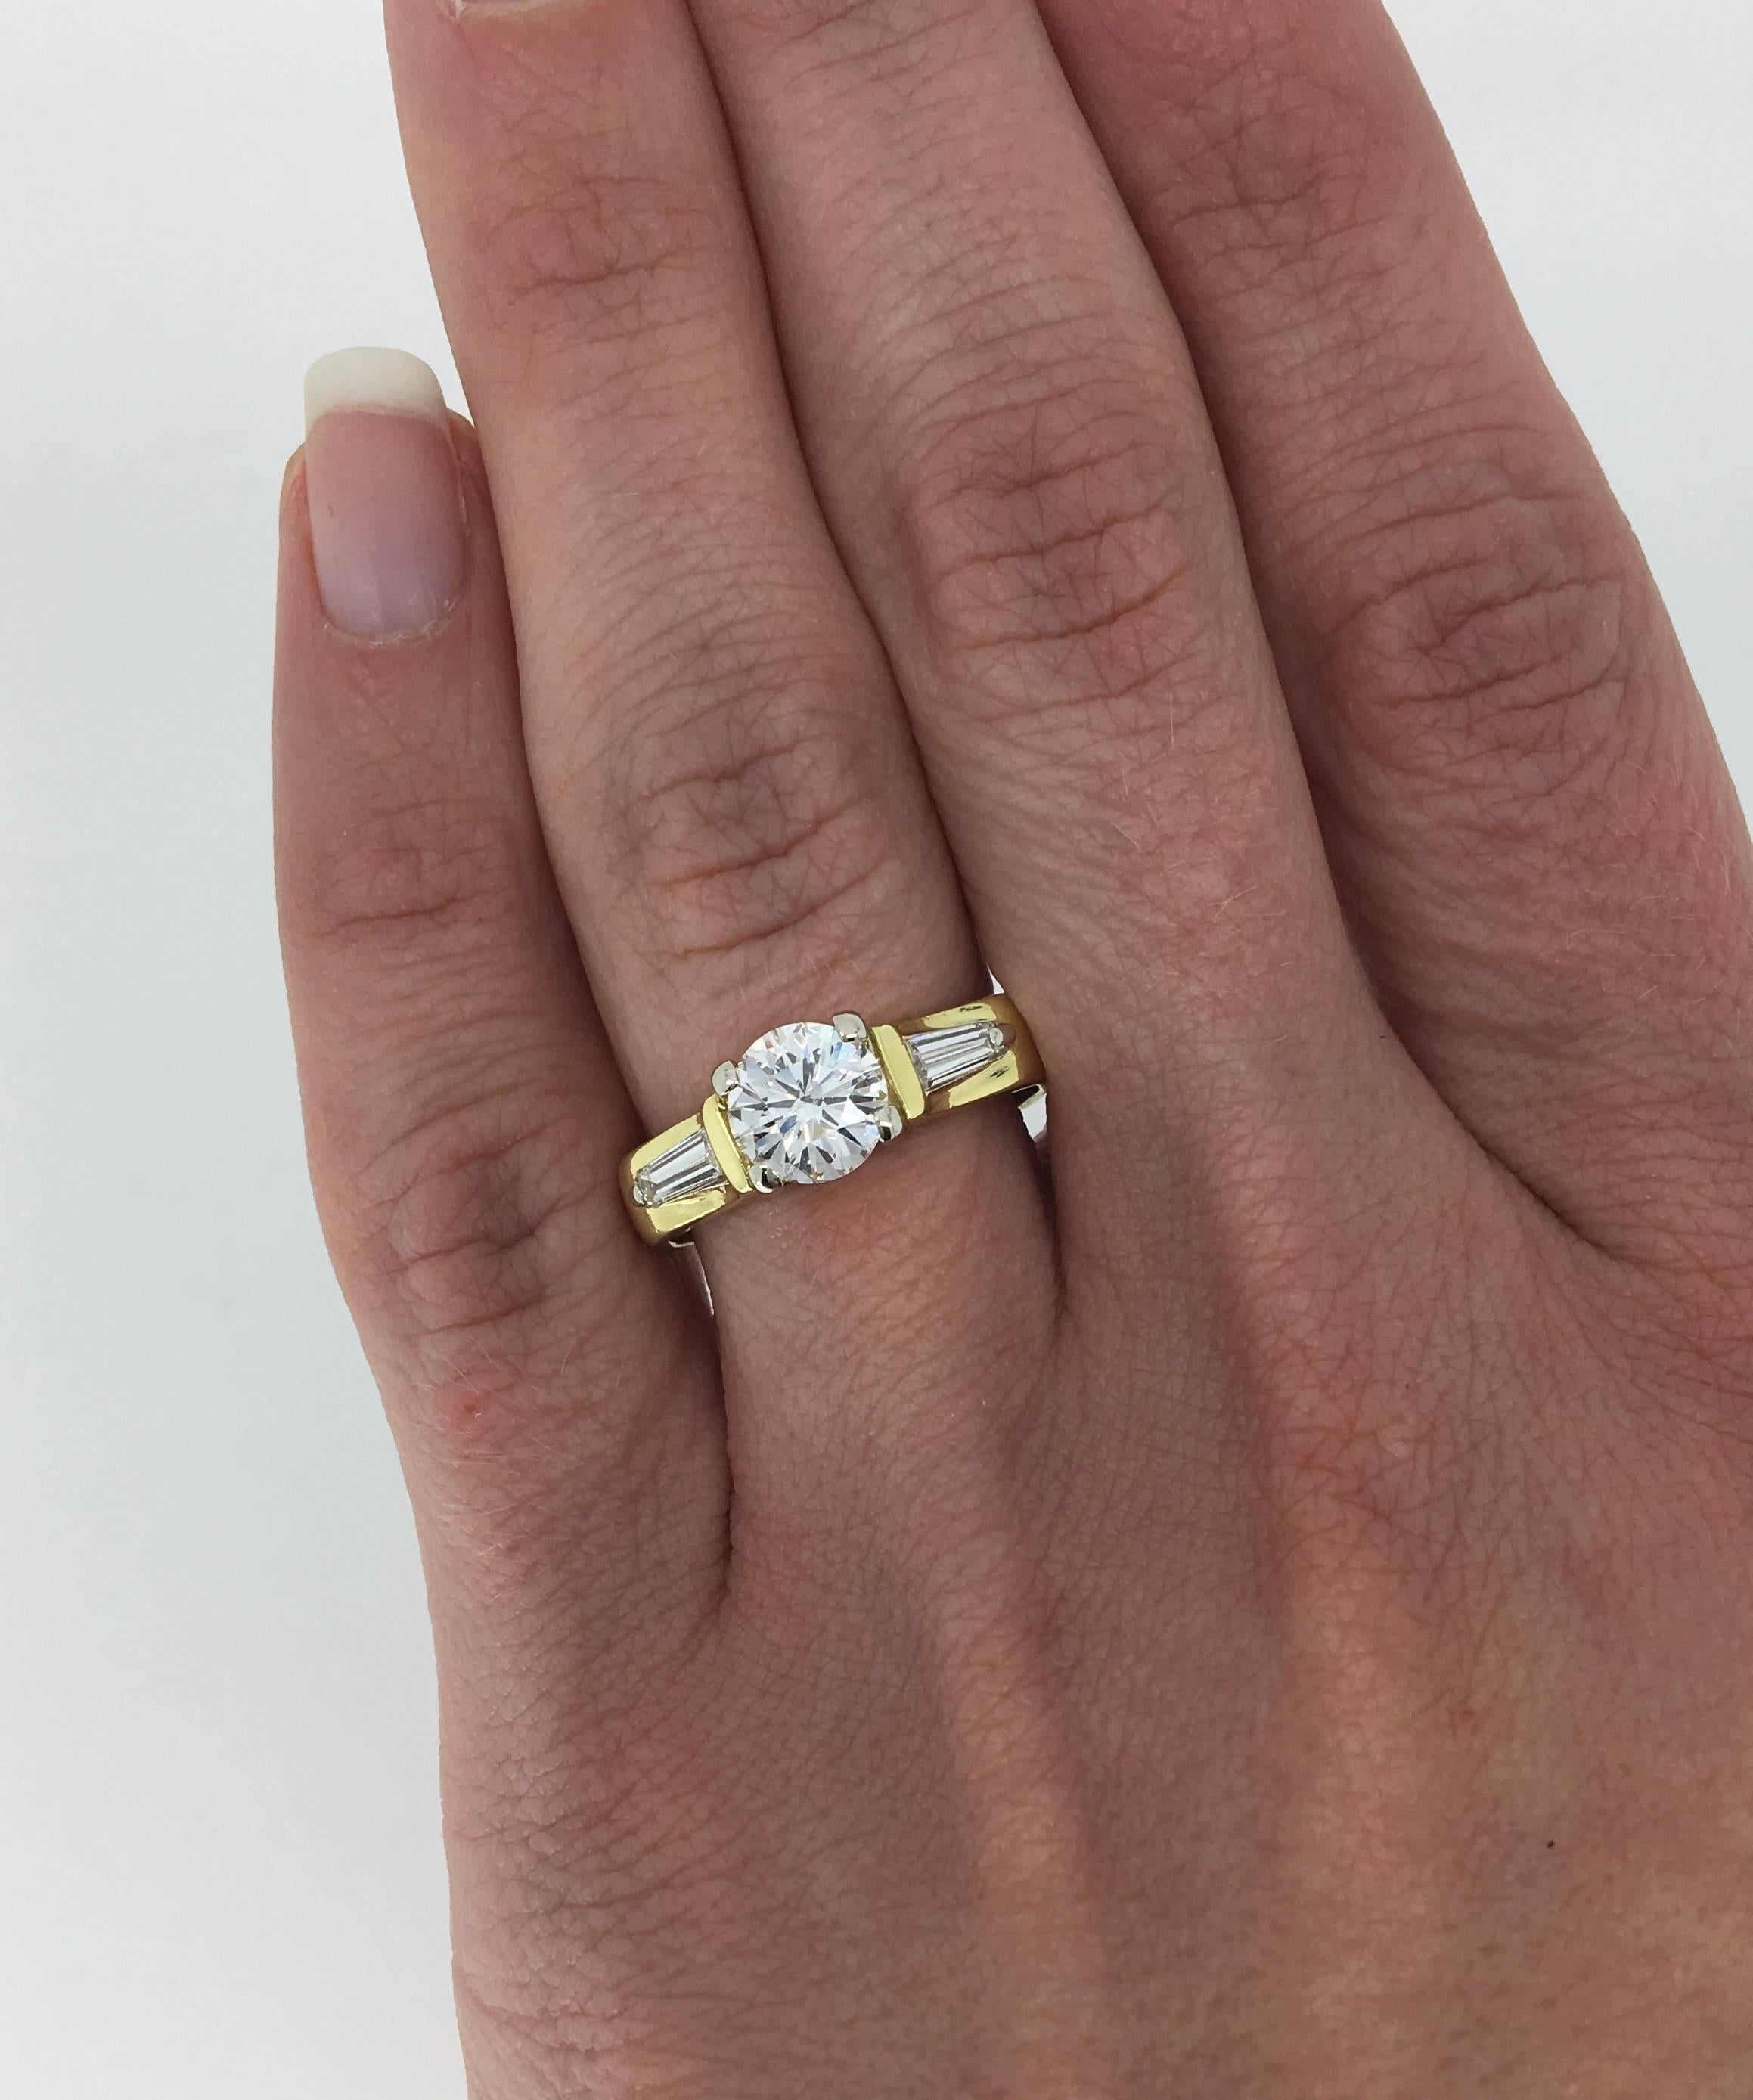 Custom 18K yellow gold engagement ring features a 1.05CT Round Brilliant Cut Diamond that displays G color and SI2 clarity. There are two Tapered Baguette Cut Diamonds accenting the featured Diamond. This ring houses approximately 1.29CTW of